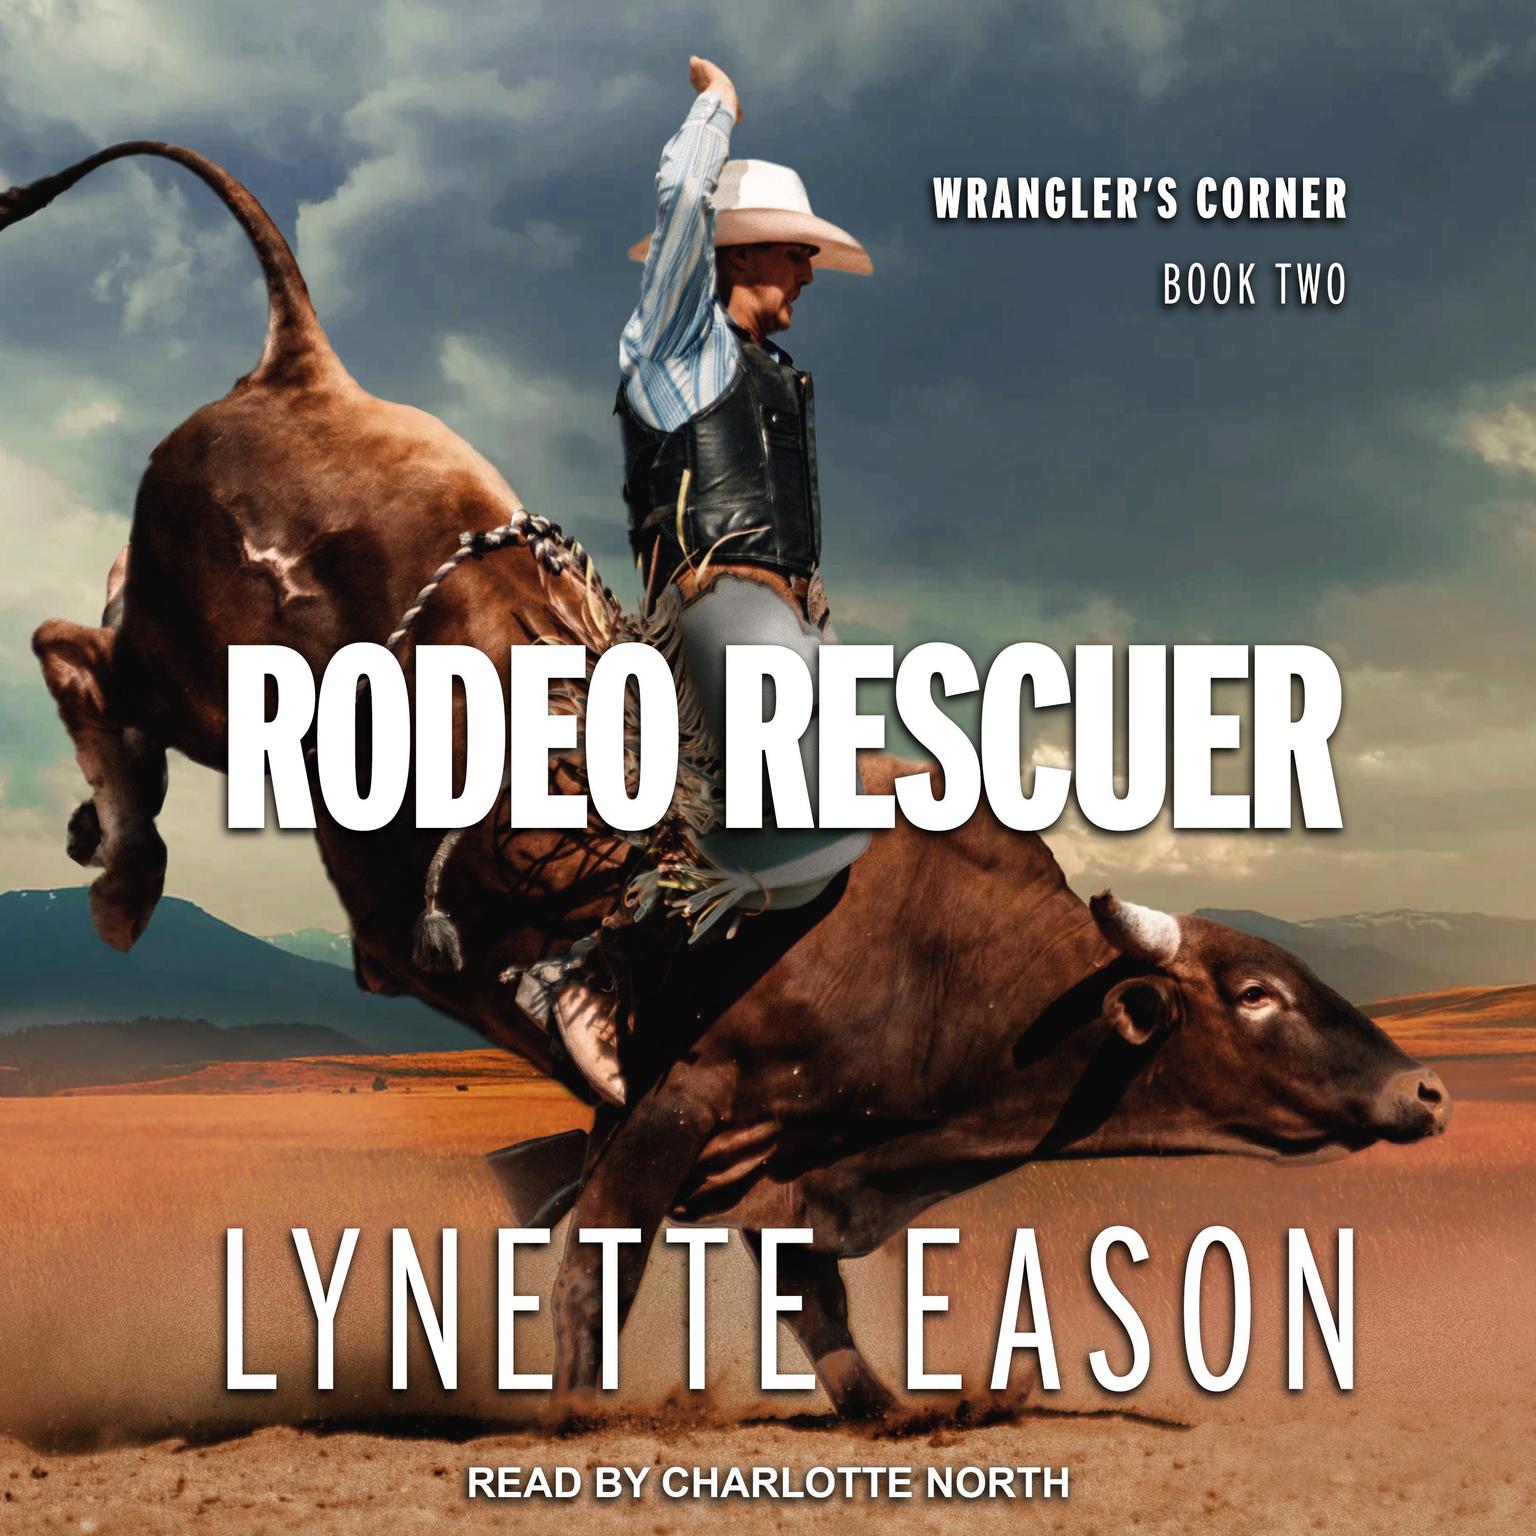 Rodeo Rescuer Audiobook, by Lynette Eason